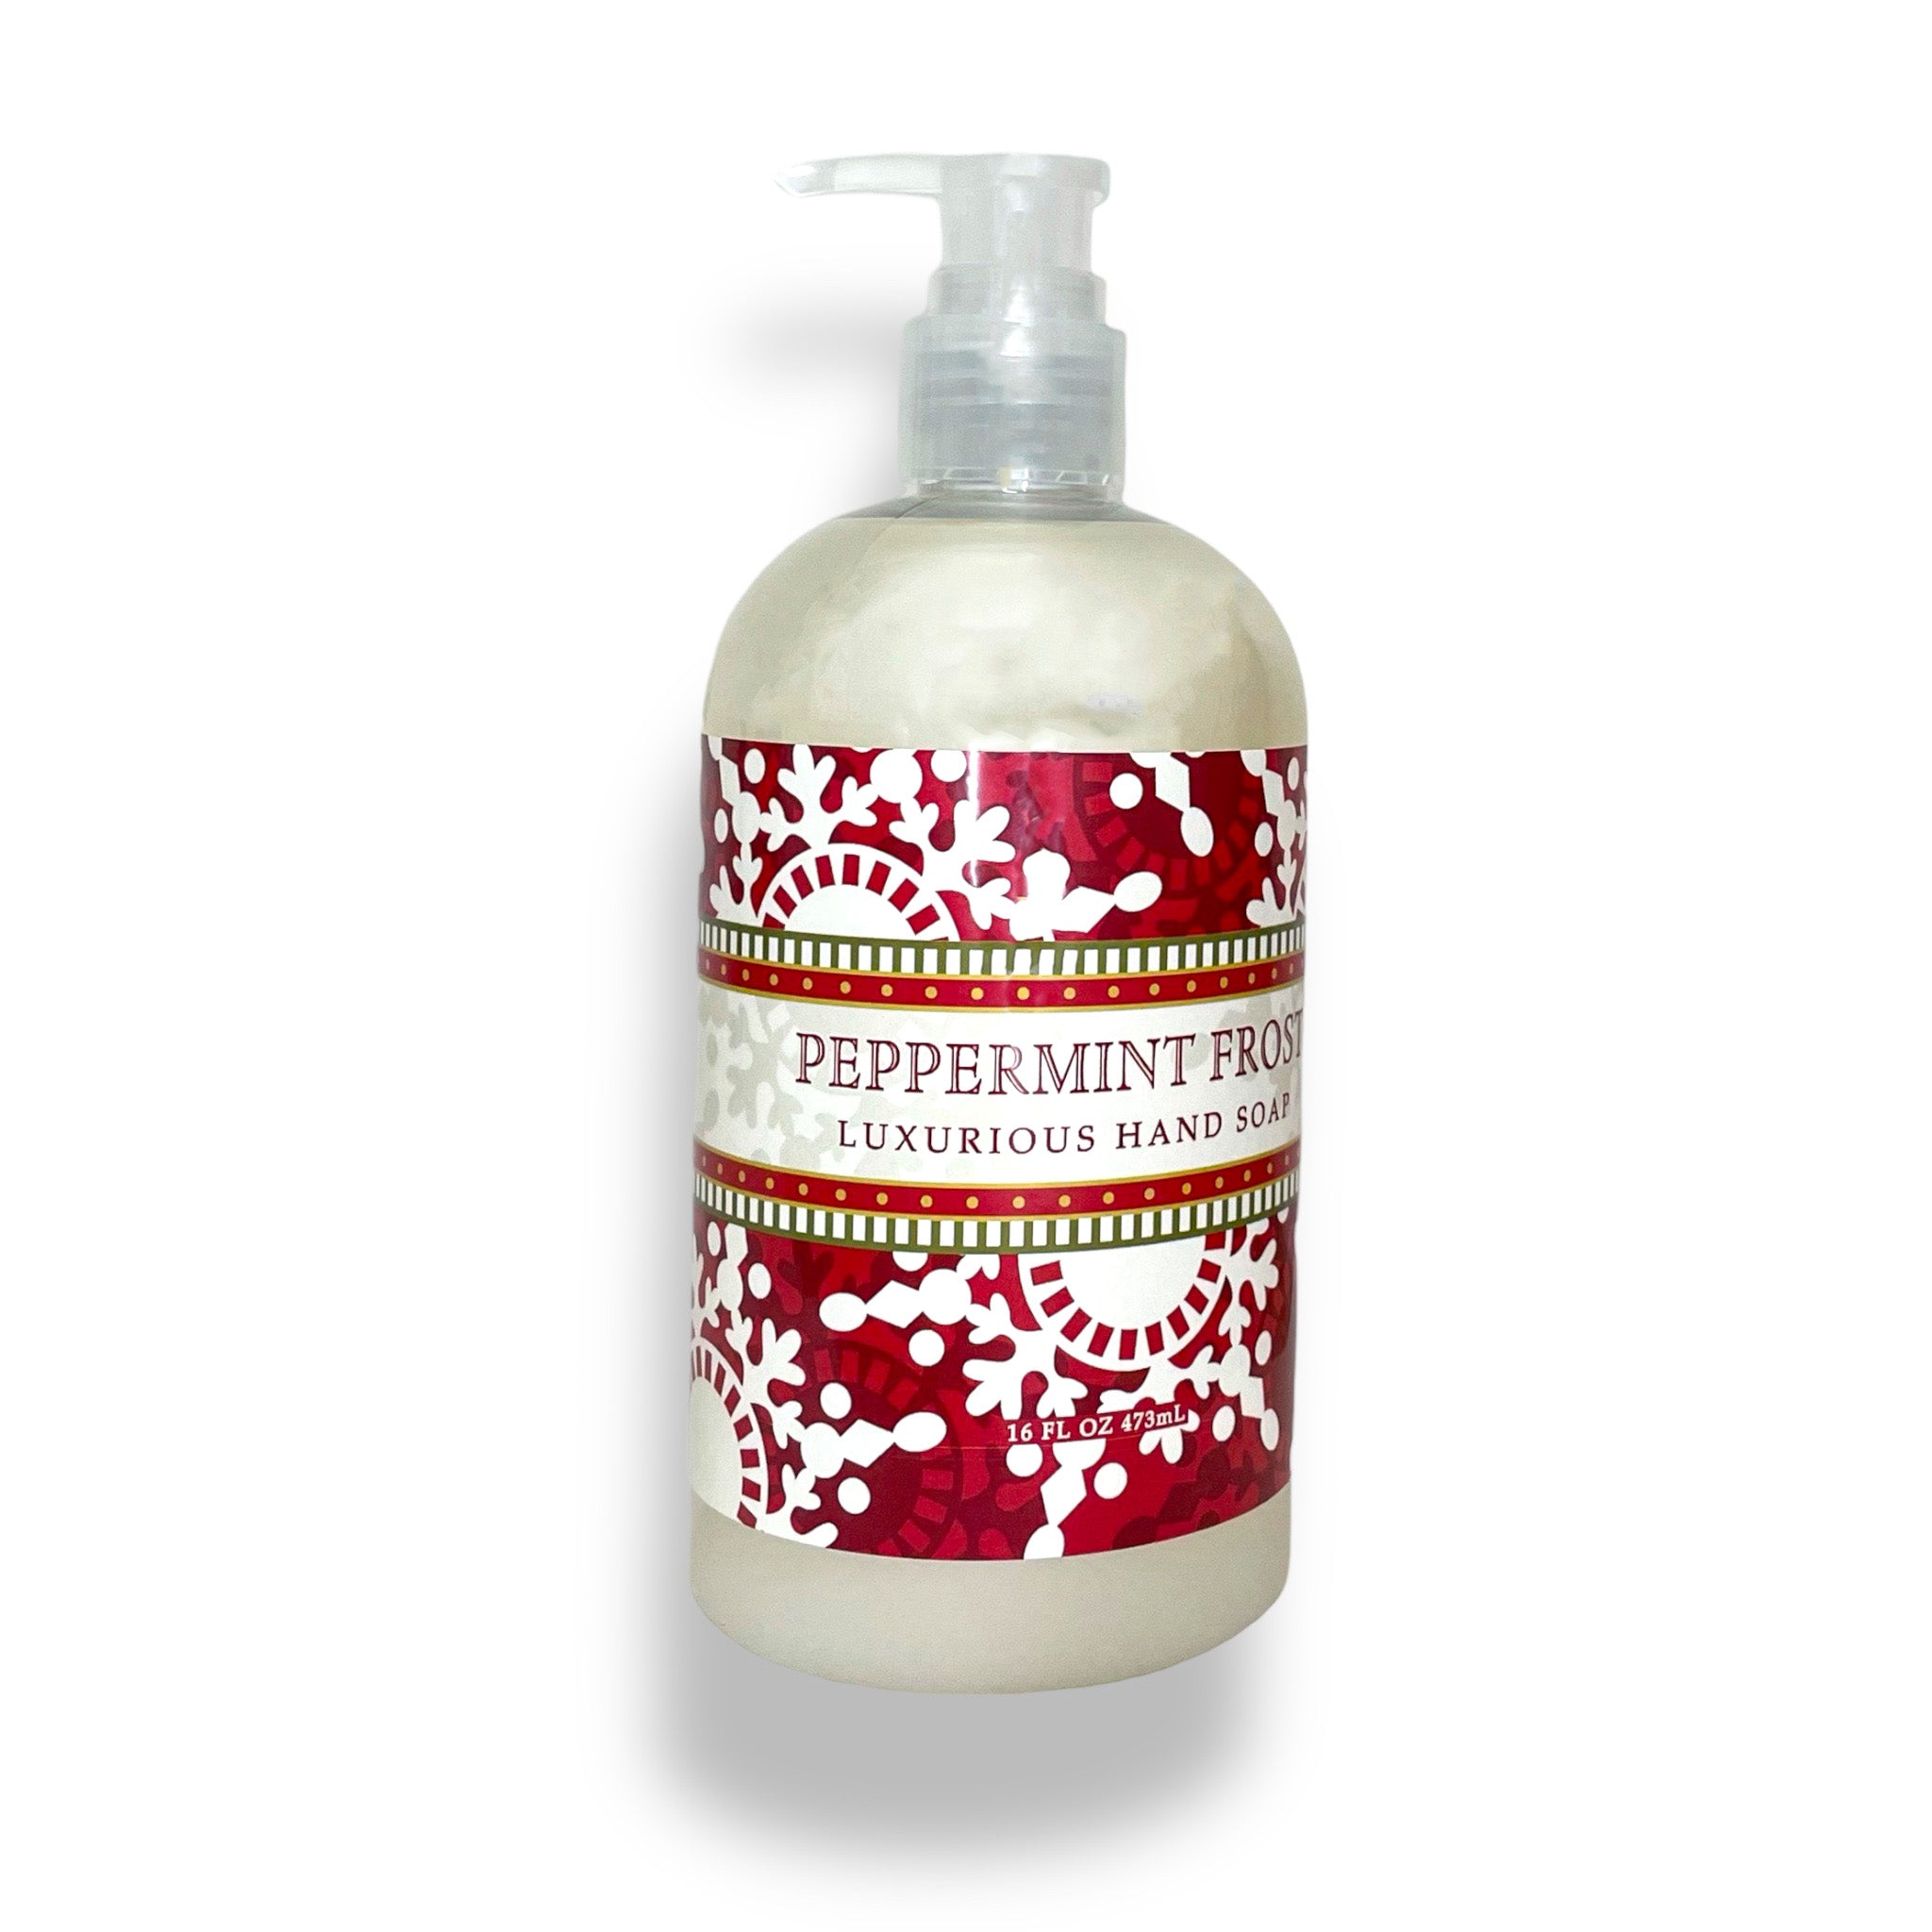 Greenwich Bay Trading Company Peppermint Frost Collection Hand Soap